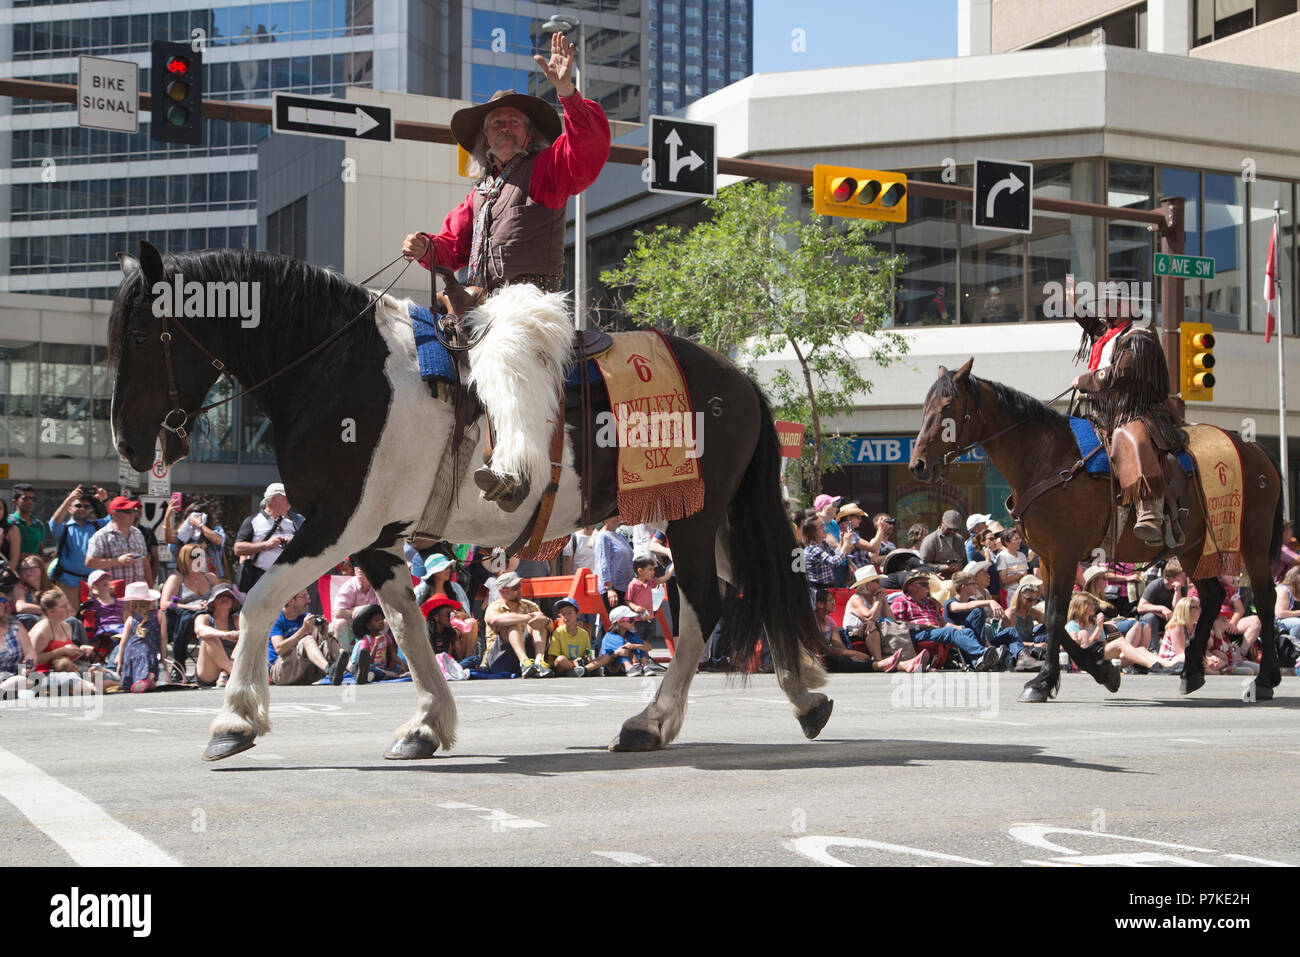 Calgary, Canada. 6th July, 2018.  Cowboys ride in the Calgary Stampede Parade. The parade through downtown kicks off the Calgary Stampede each year. Rosanne Tackaberry/Alamy Live News Stock Photo